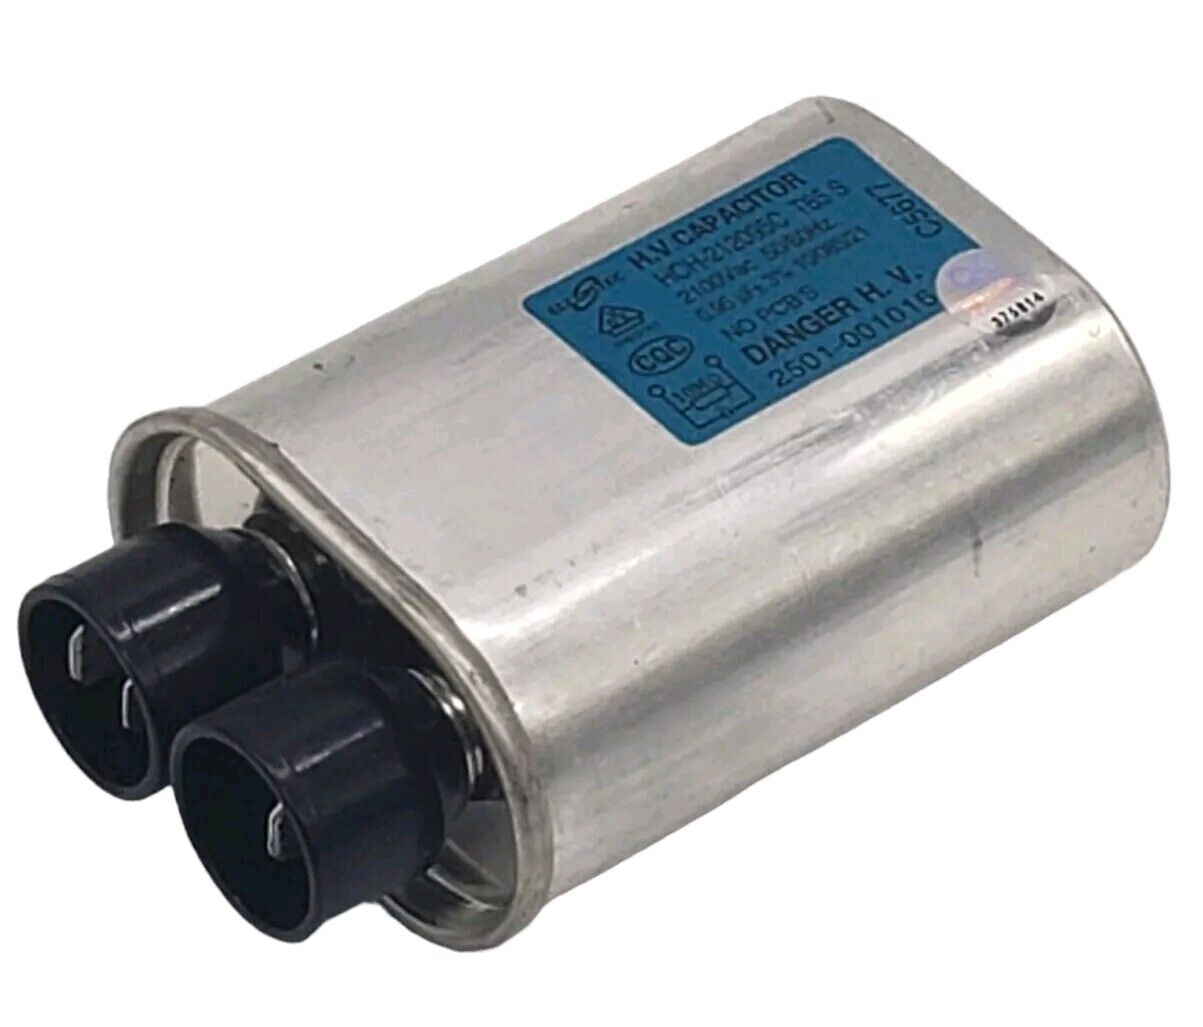 Replacement for Whirlpool Microwave Capacitor 2501-001016